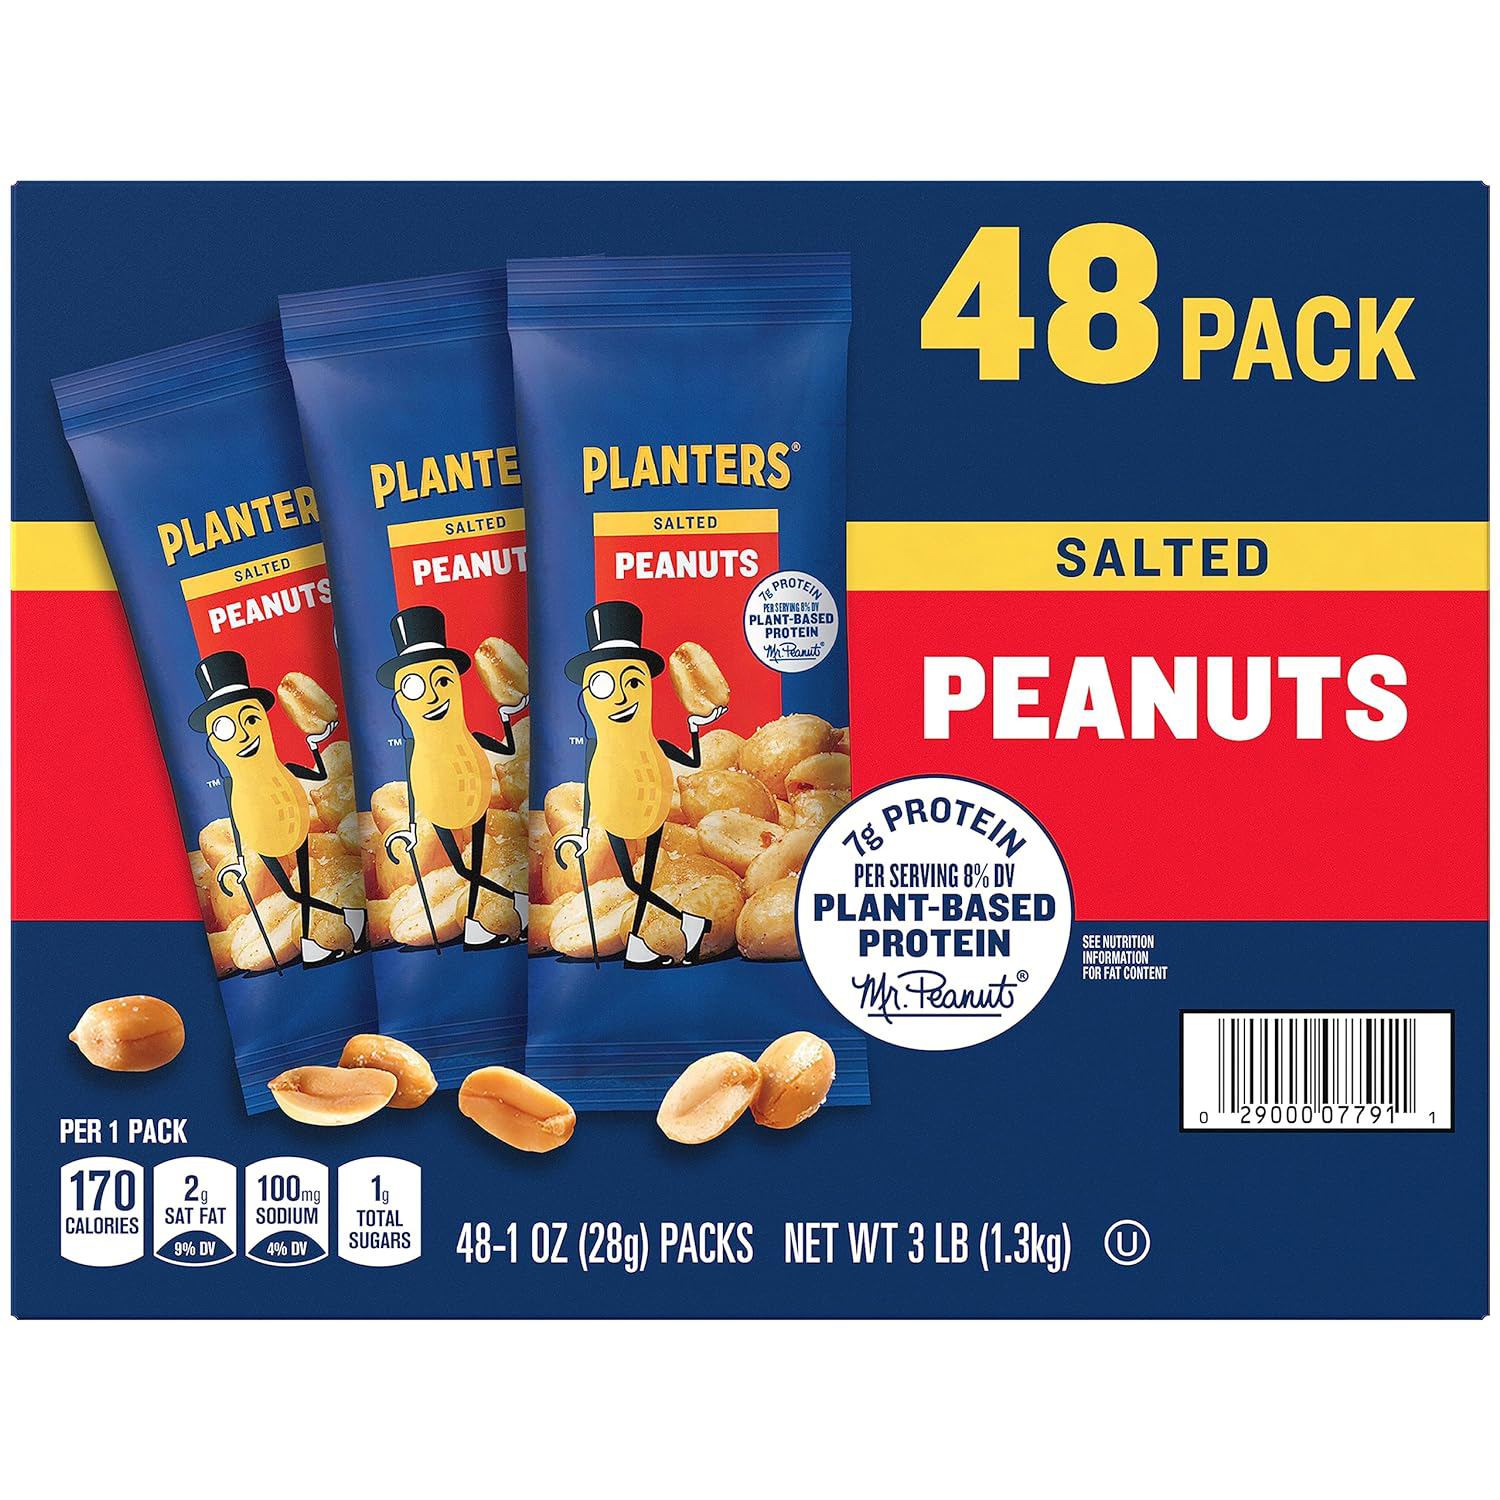 PLANTERS Salted Peanuts, 1 oz. Bags 48 Pack - Snack Size Peanuts with Sea Salt &